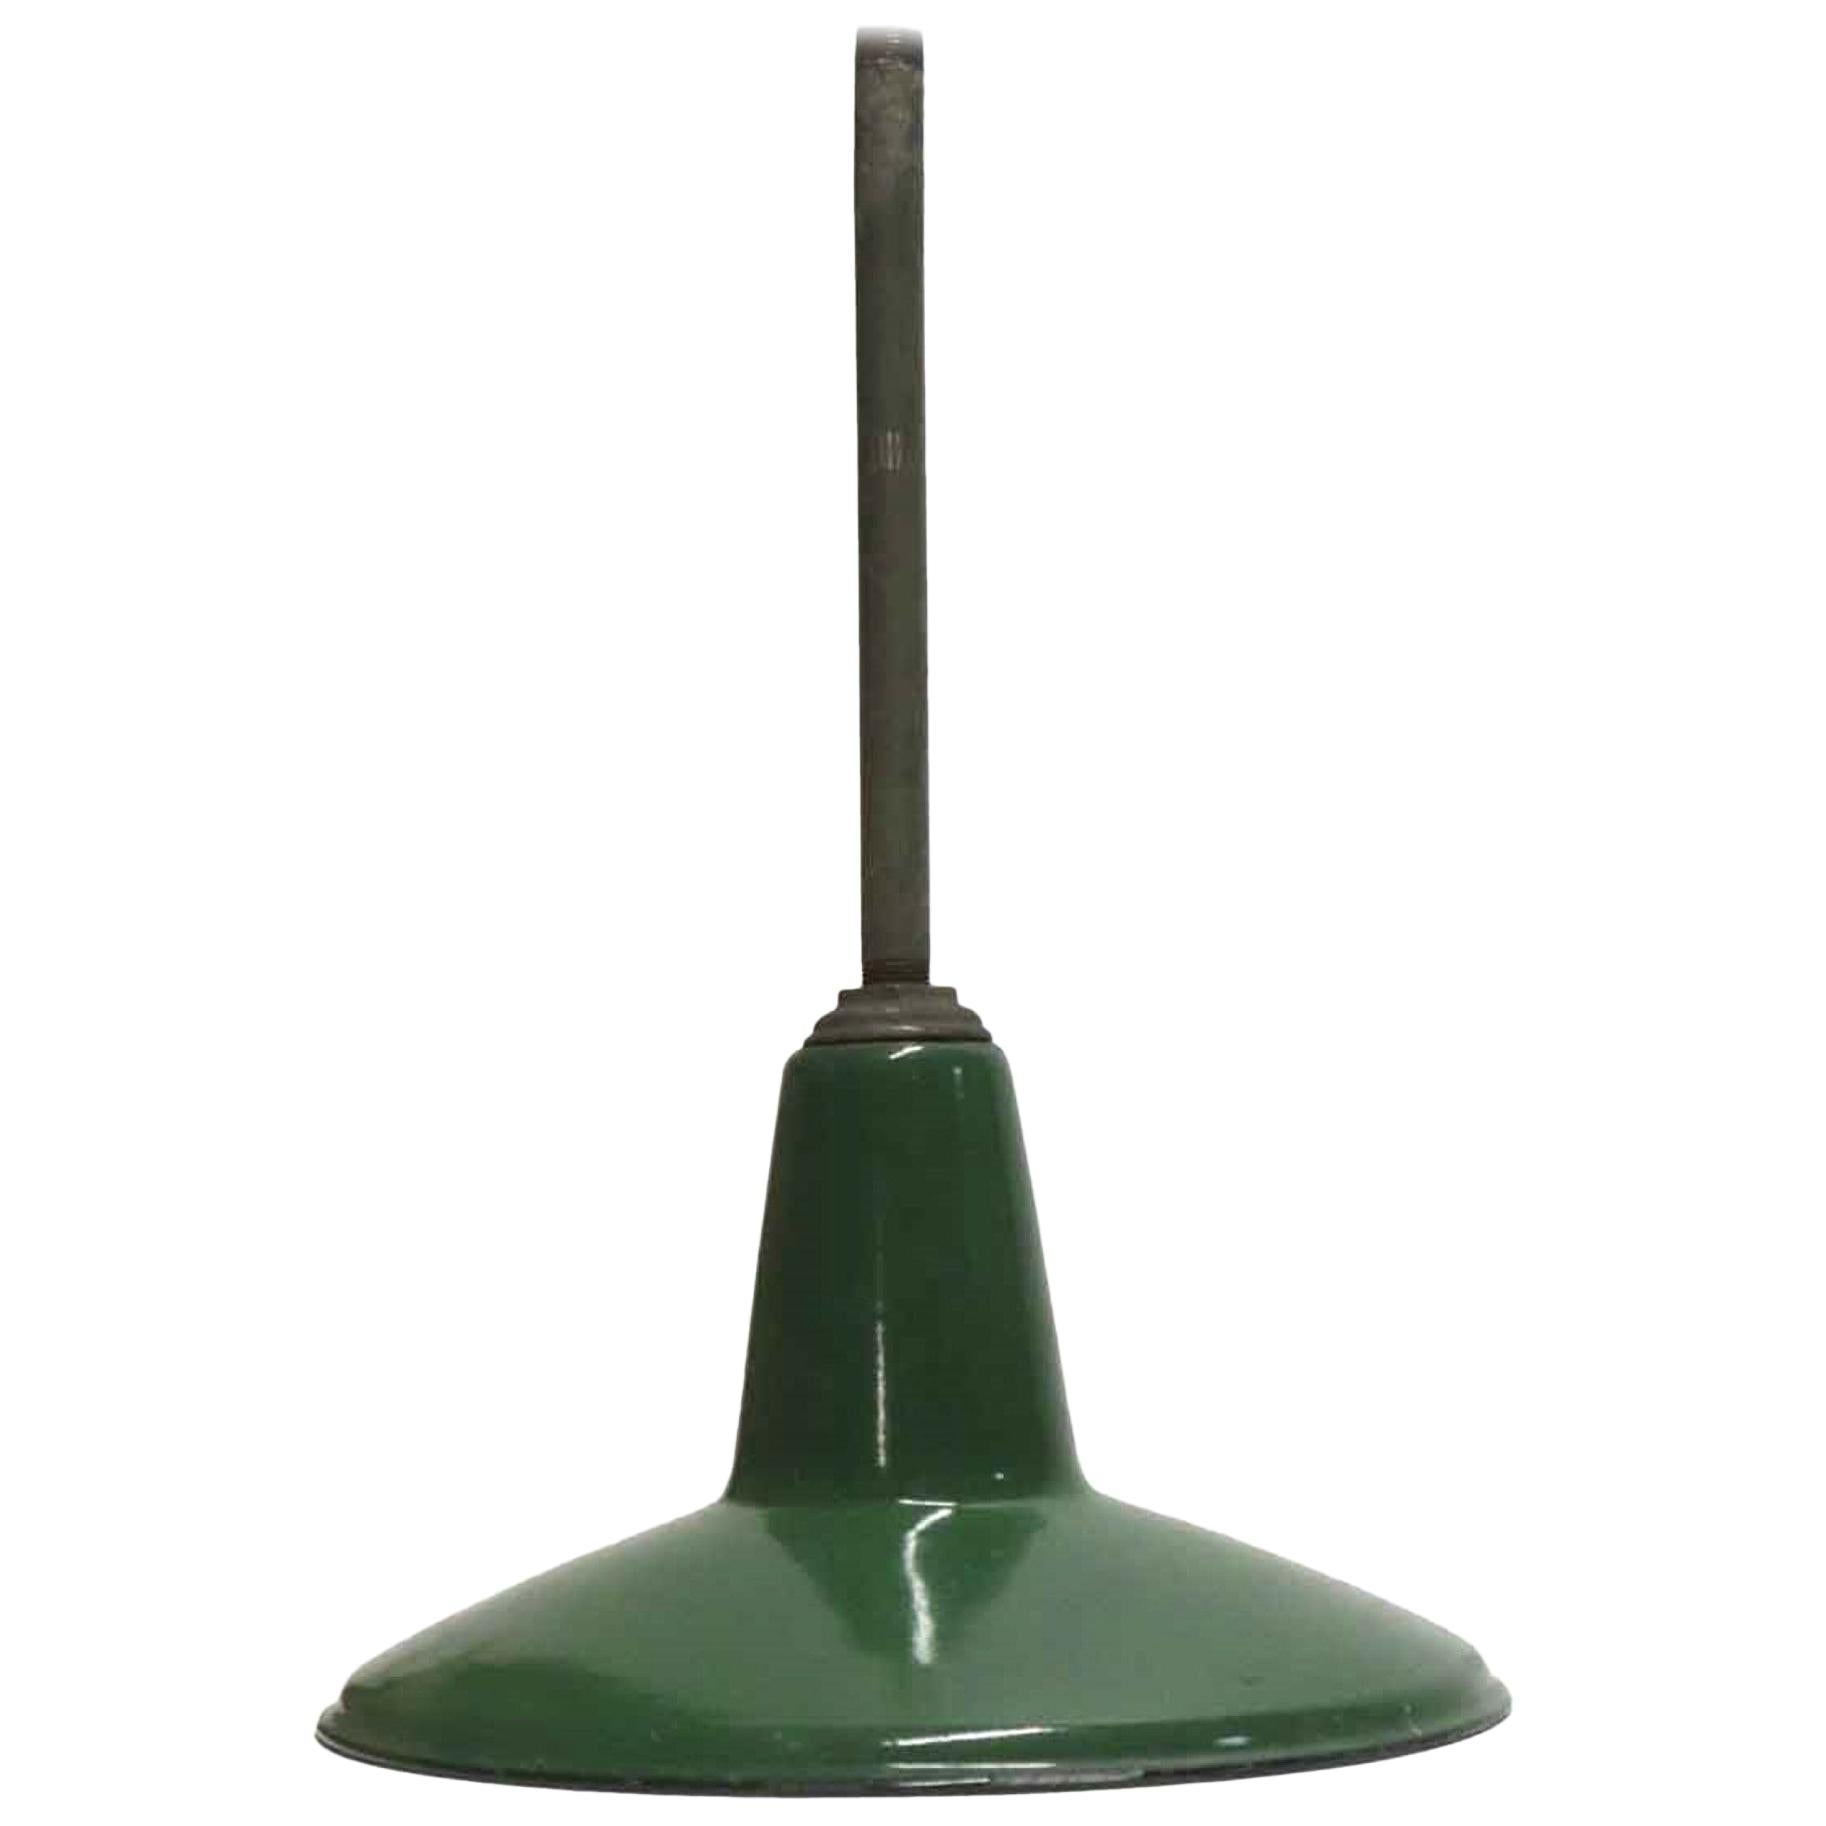 1970s Vintage Industrial Steel Pendant Light with a Green Enamel Finish, Qty